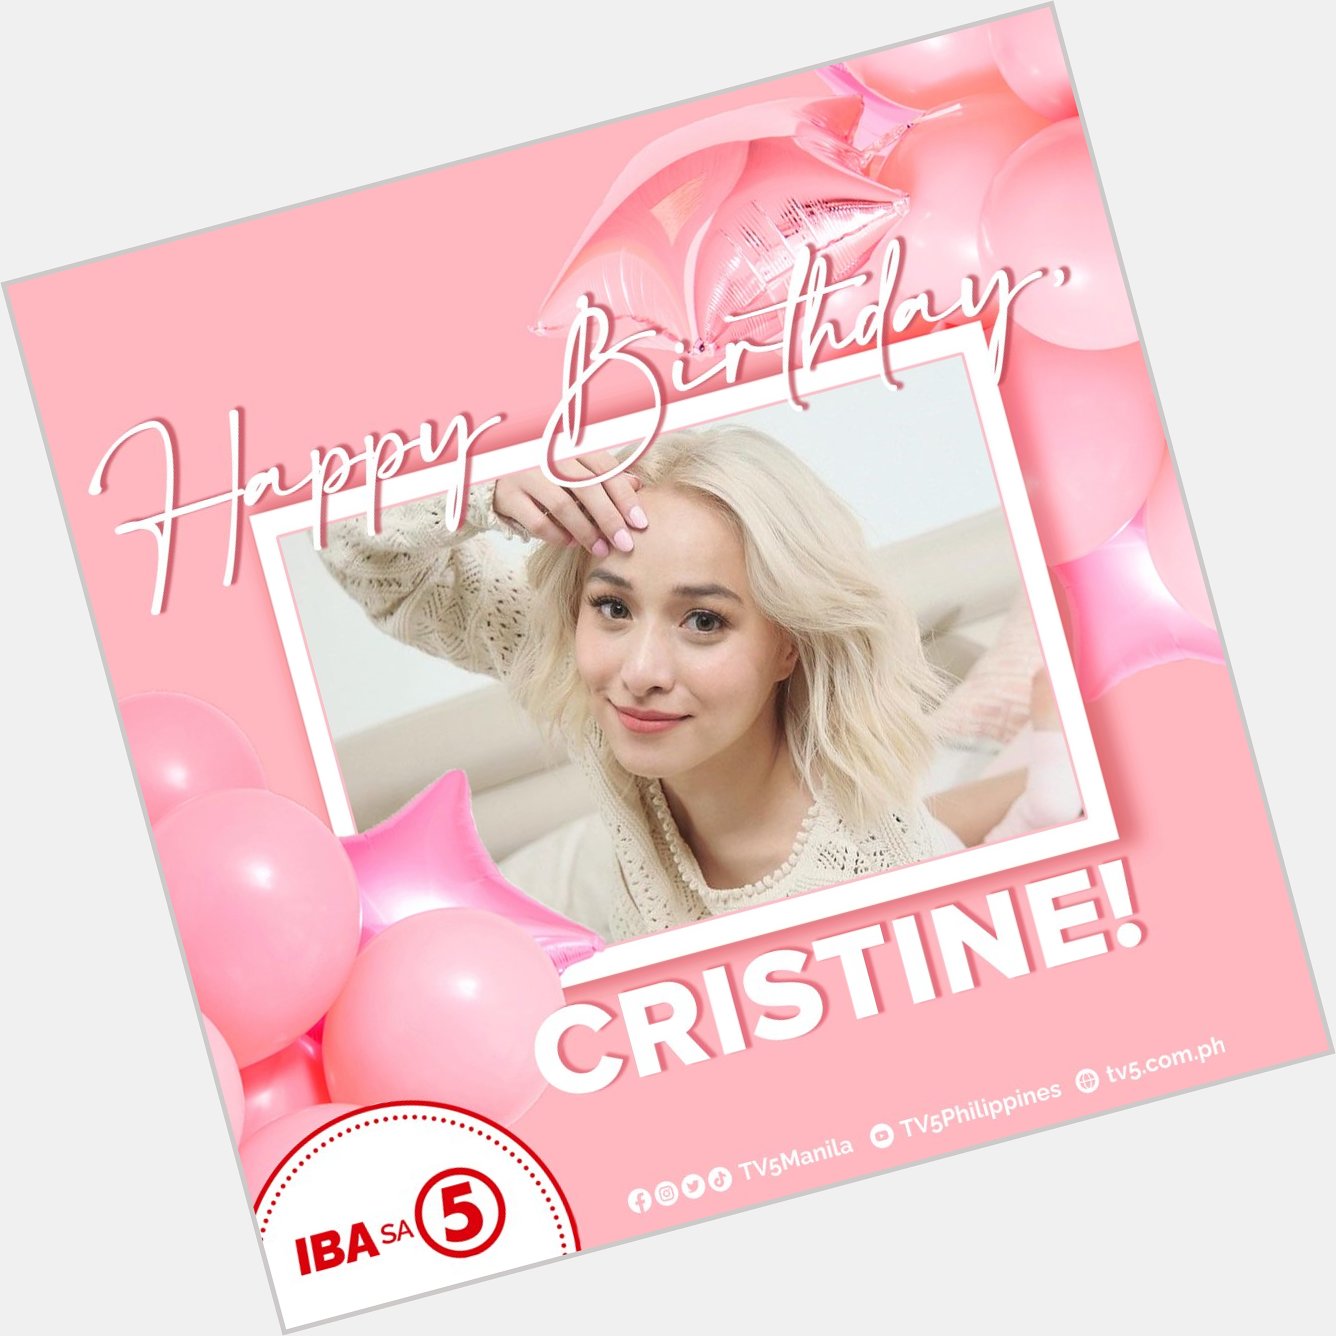 Happy happy birthday, Cristine Reyes! May God bless you with nothing but the best things in life! 